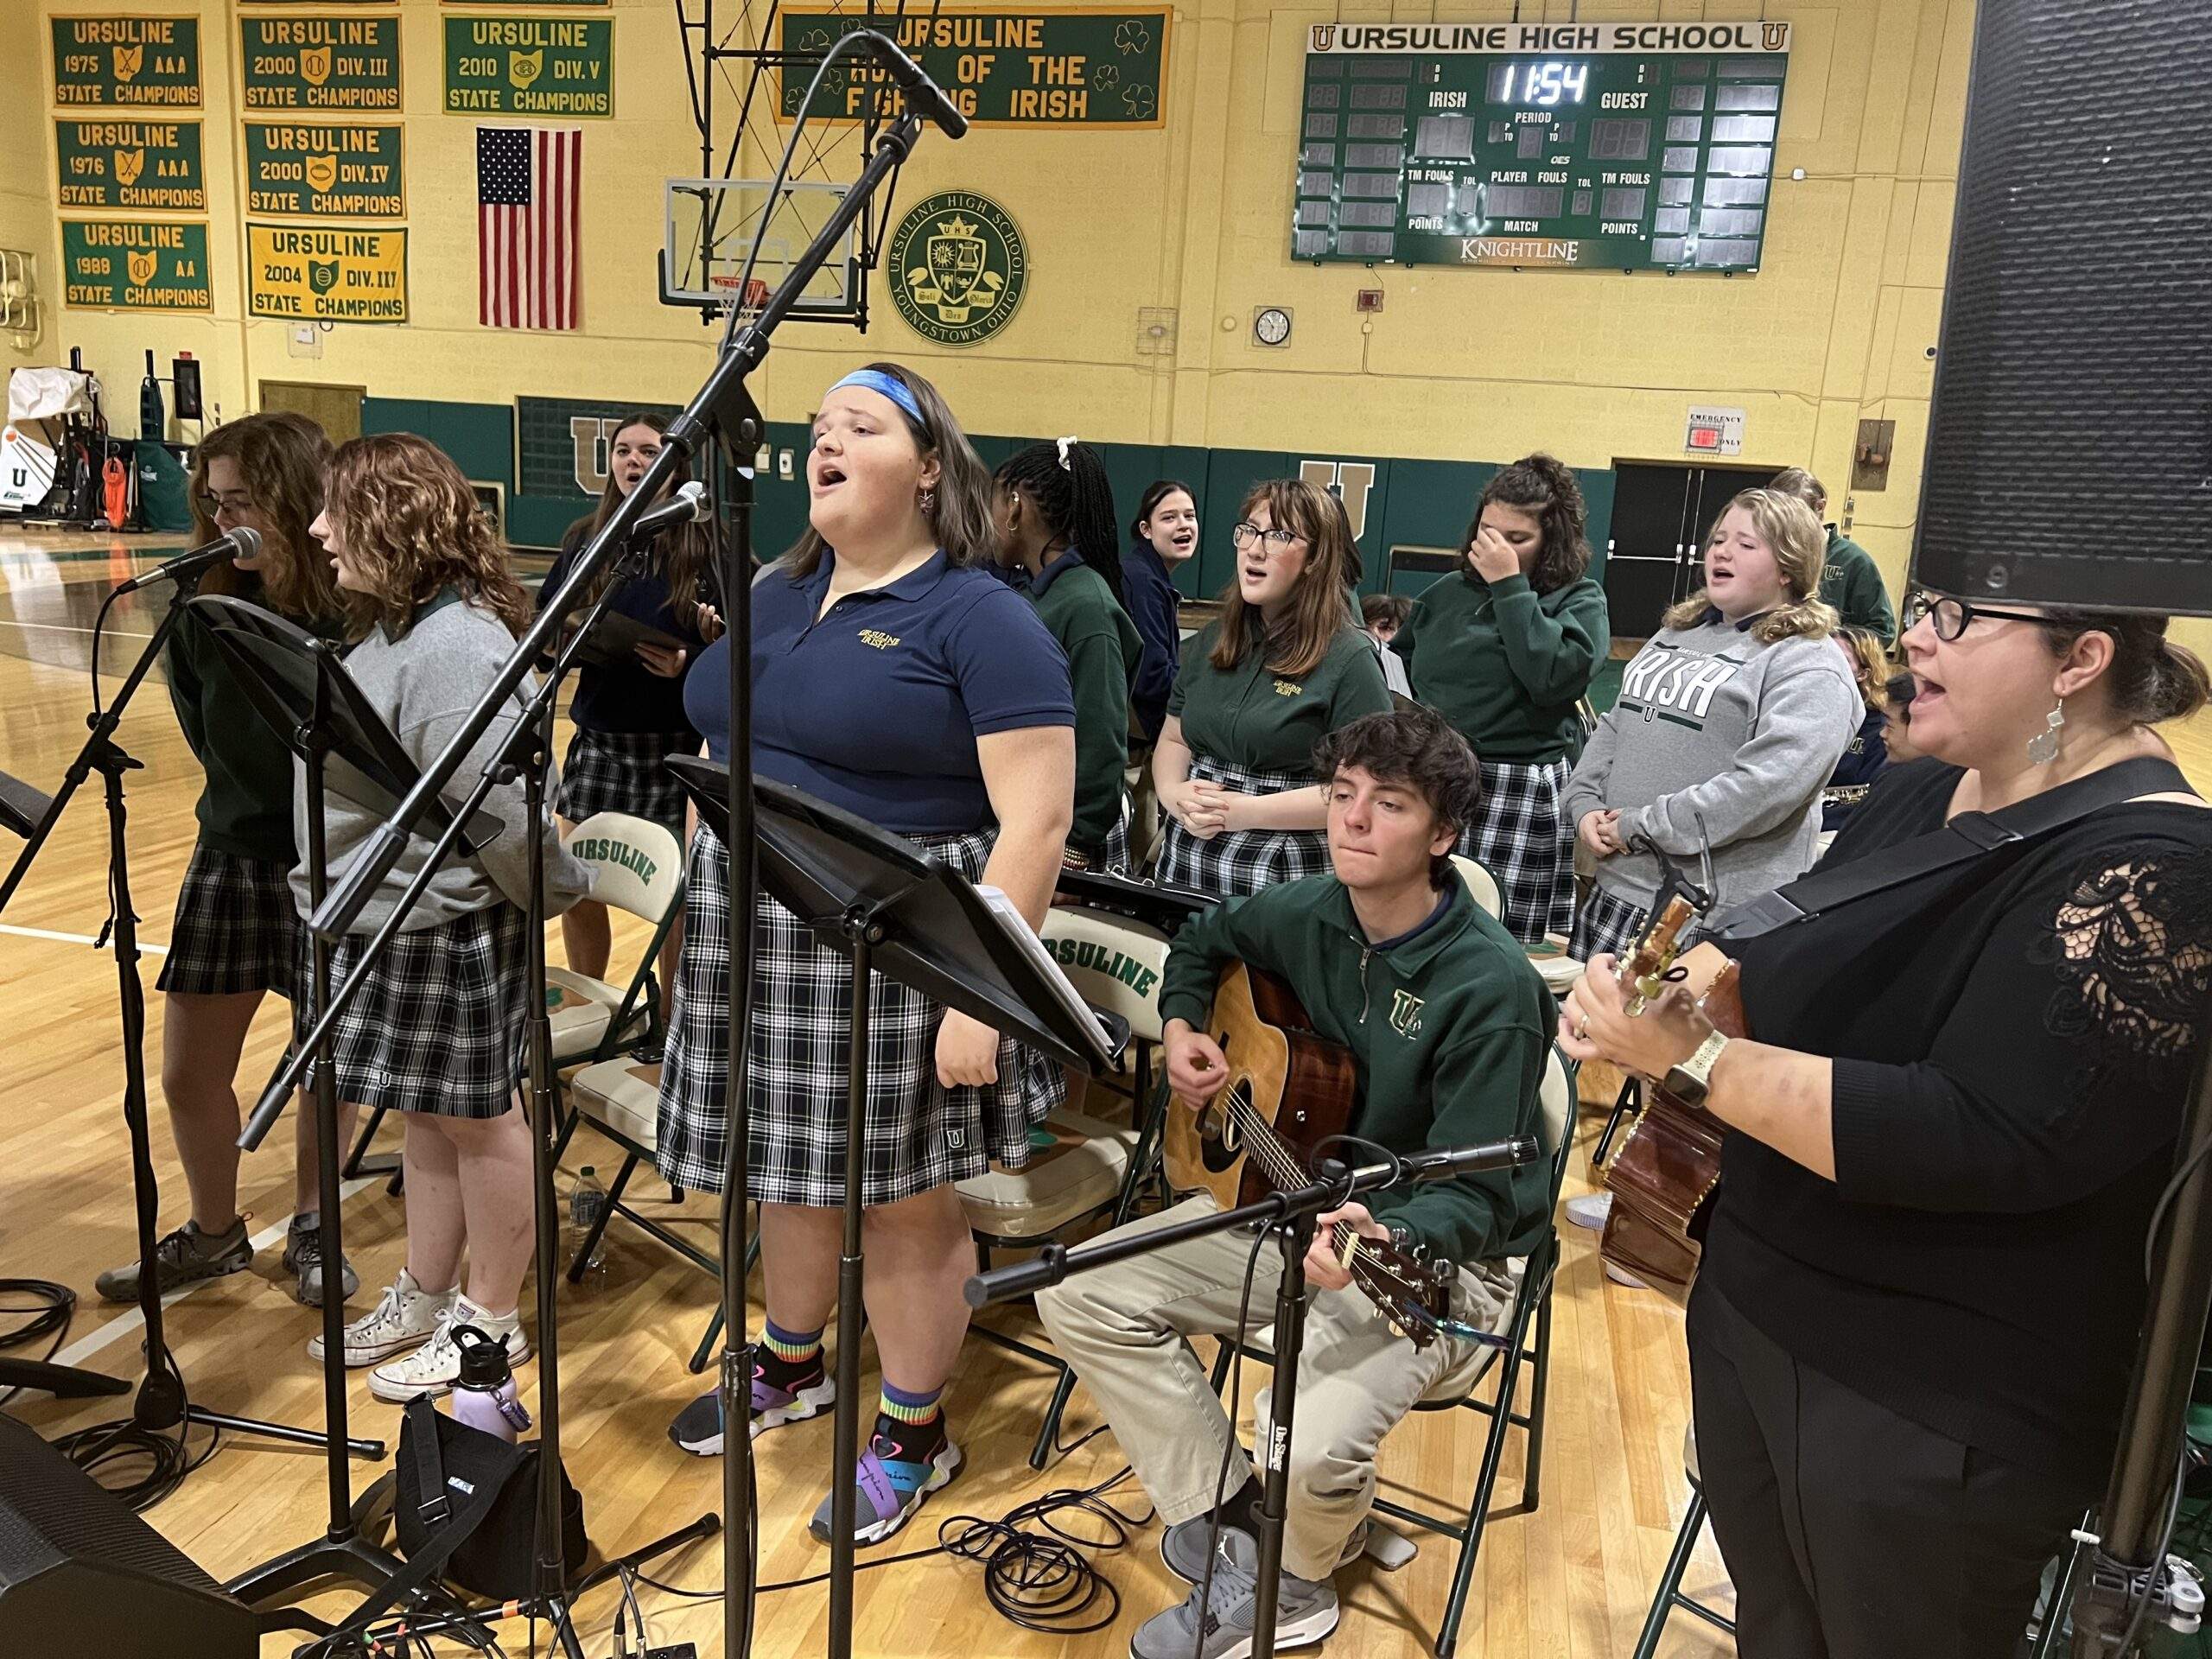 Ursuline high school students sing and play instruments at the Thanksgiving Day Mass in their gym